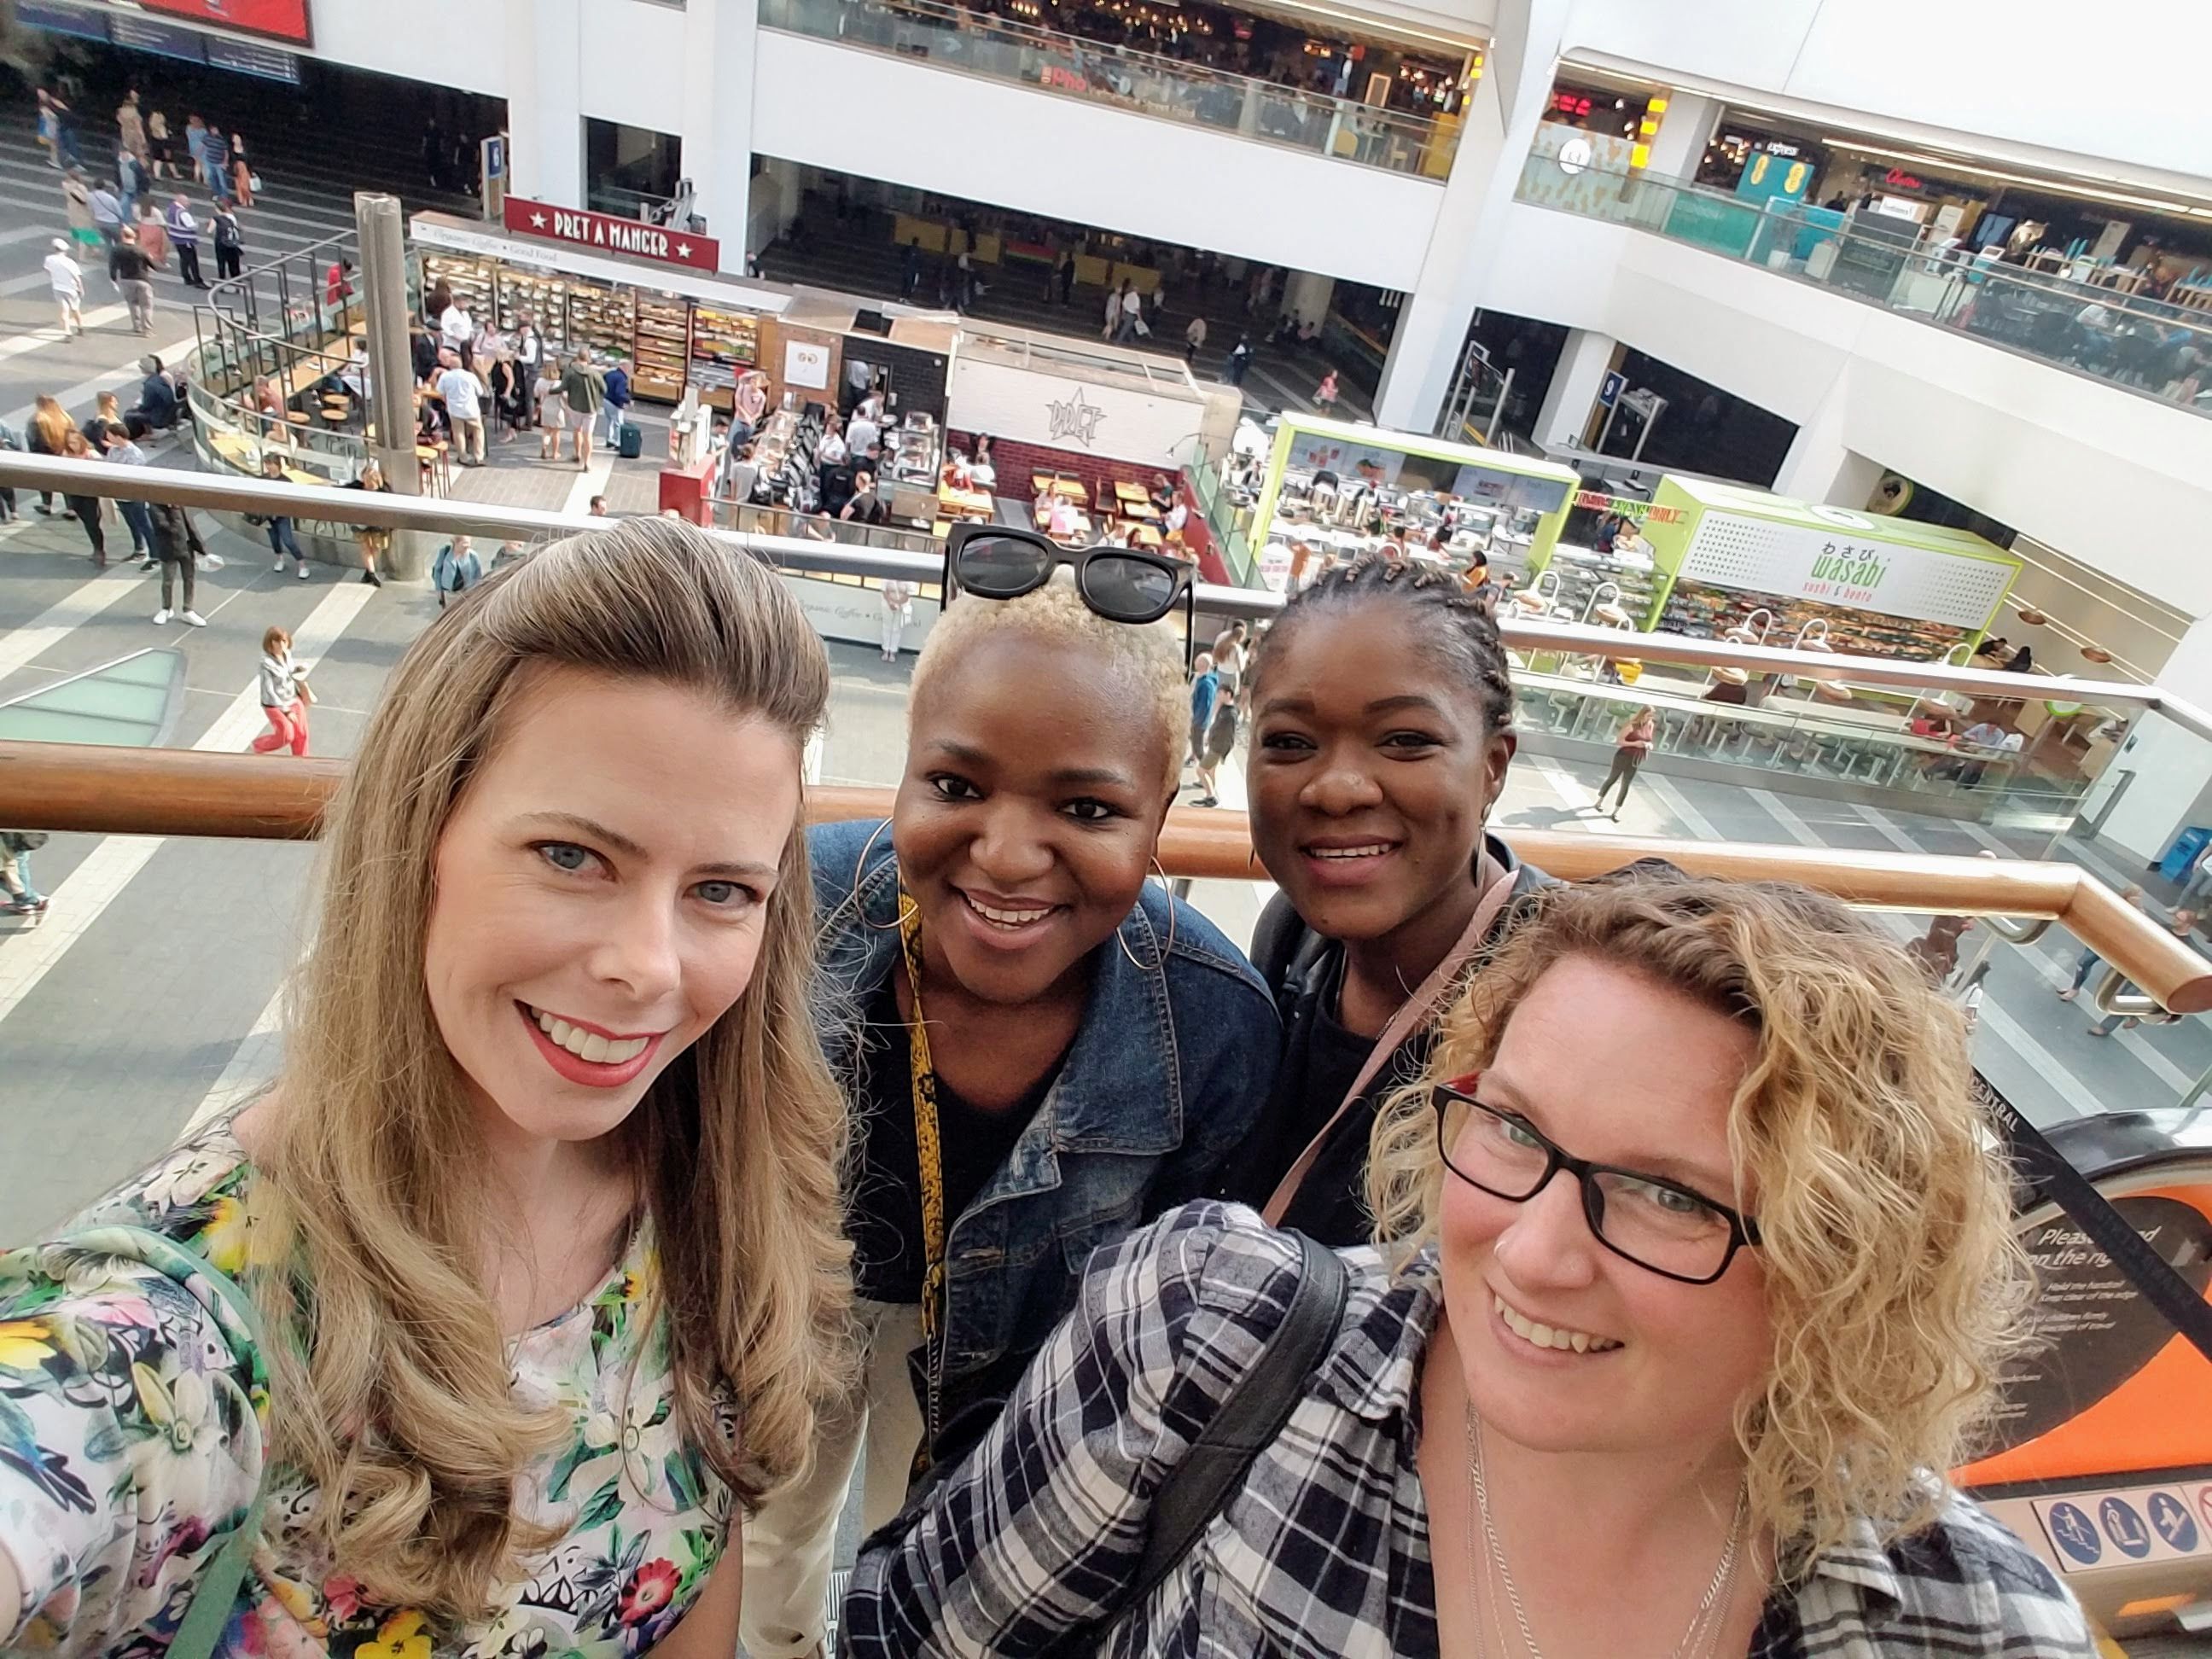 My Birmingham Foodie Meetup with new LGs  @Sandychelle  & @proudlywoman (& her friend) 2019